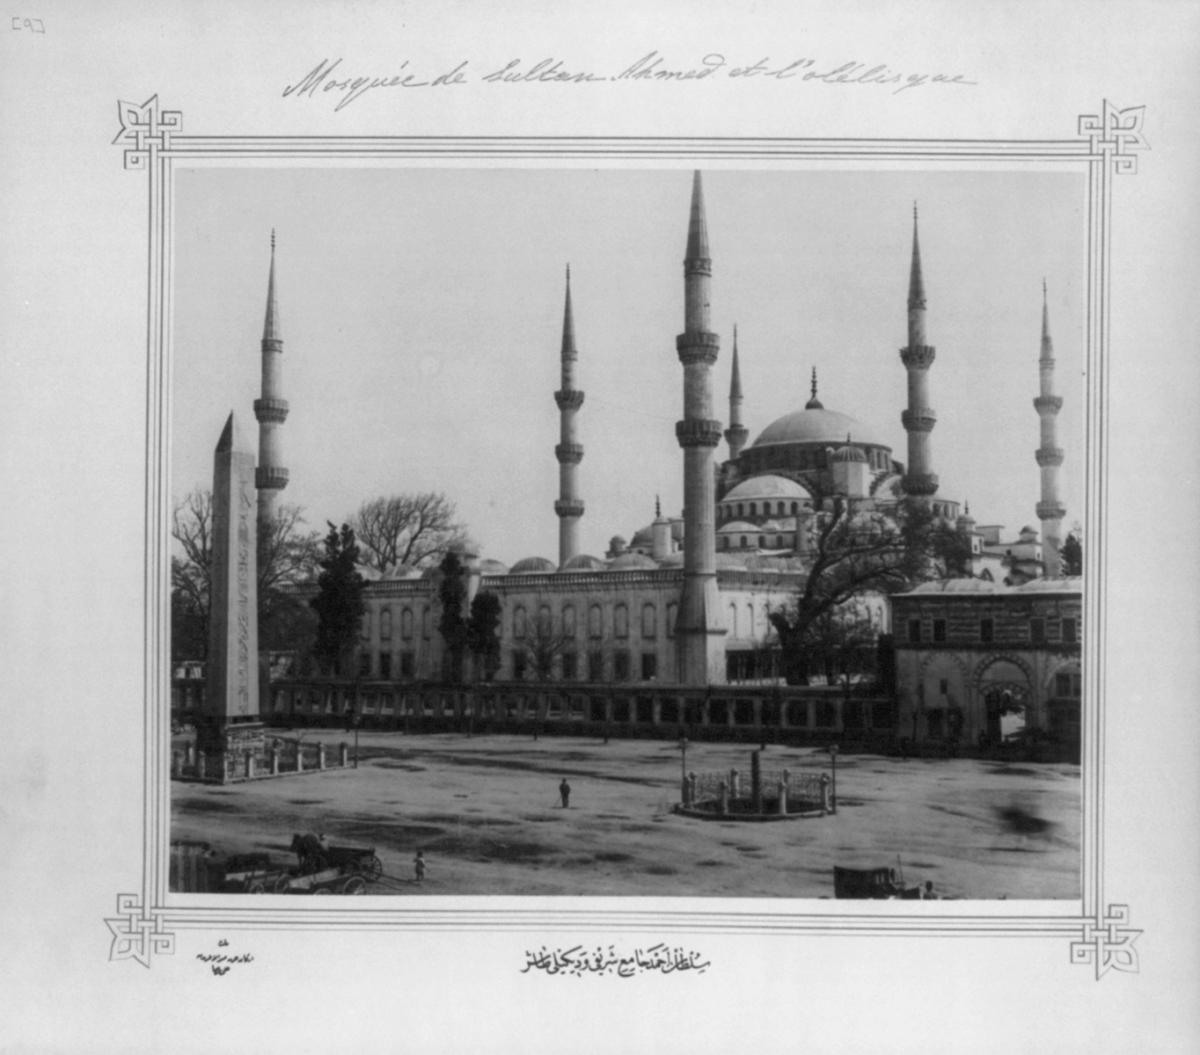 Canadian School Painting of the Sultan Ahmed or Blue Mosque, Istanbul, 1928